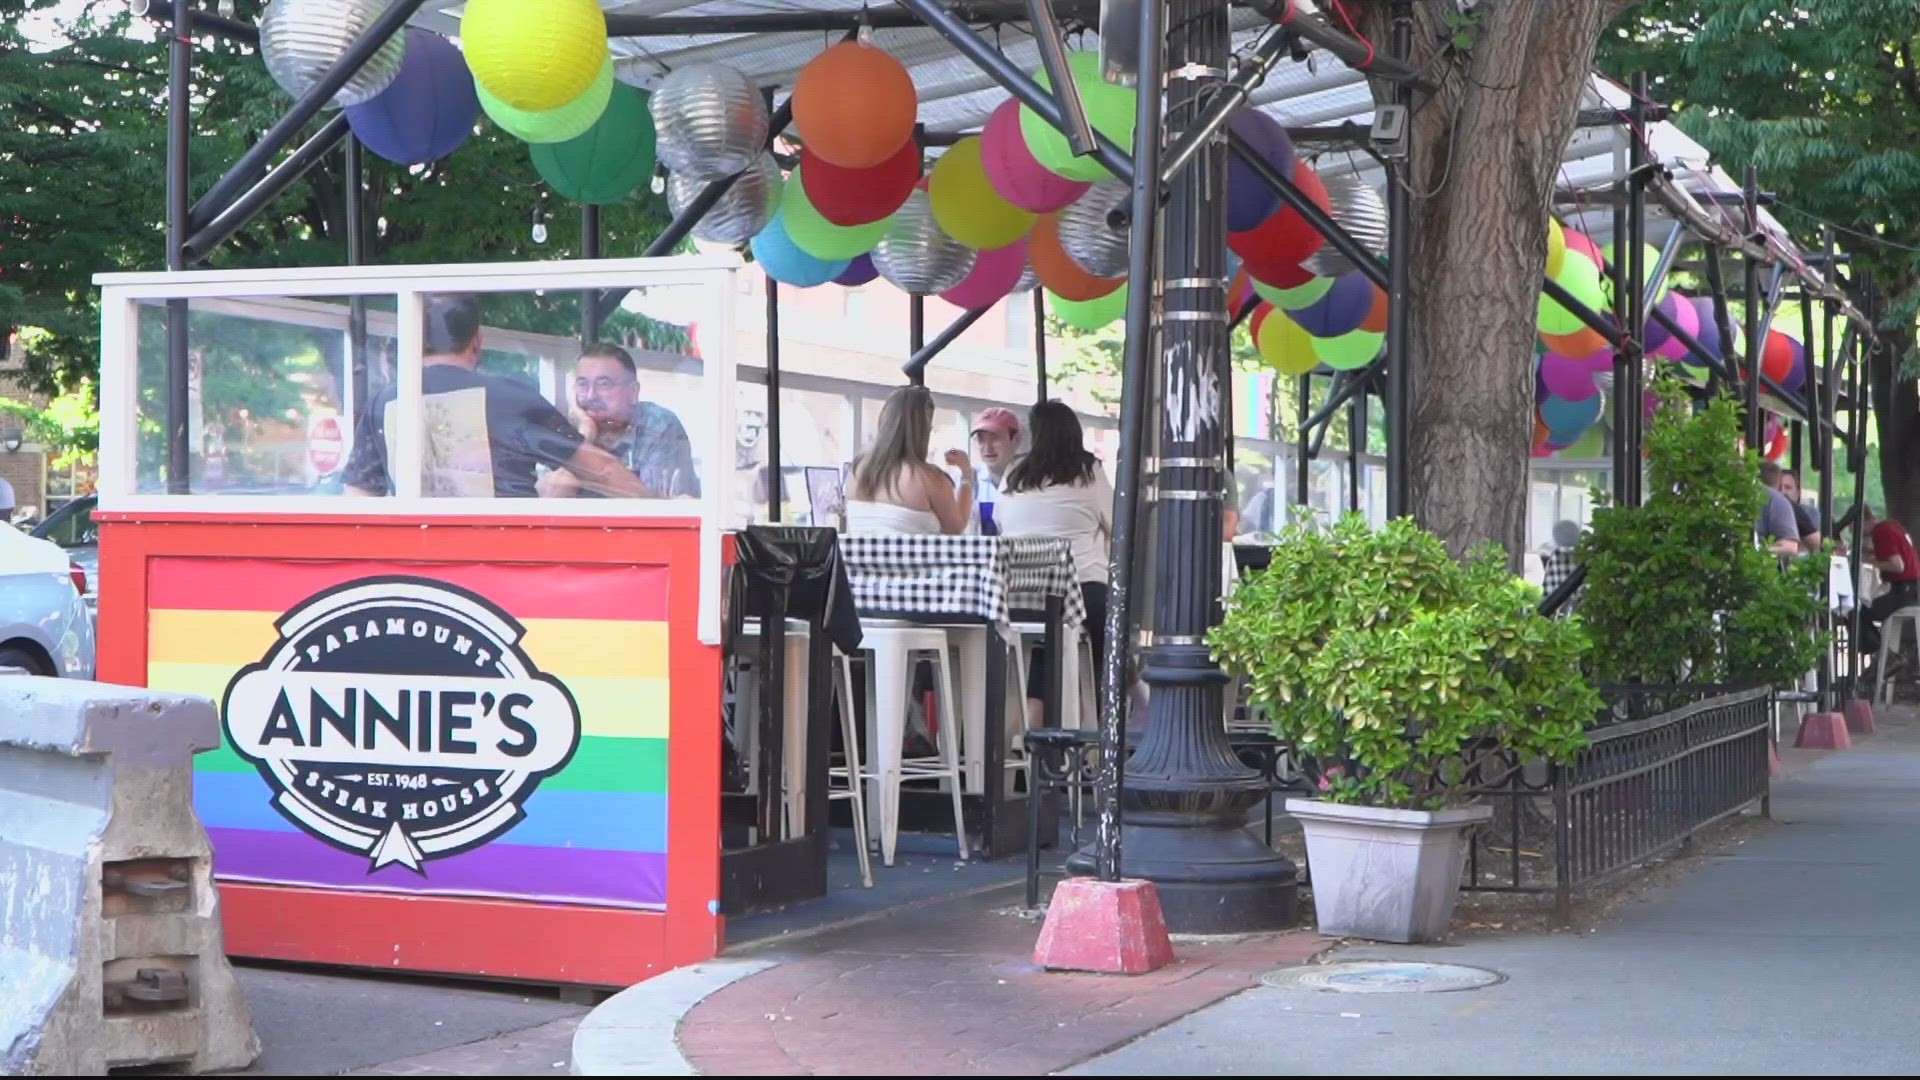 Annie's has been a safe space for the LGBTQ+ community for decades, even as places like it face increasing pushback nationwide.